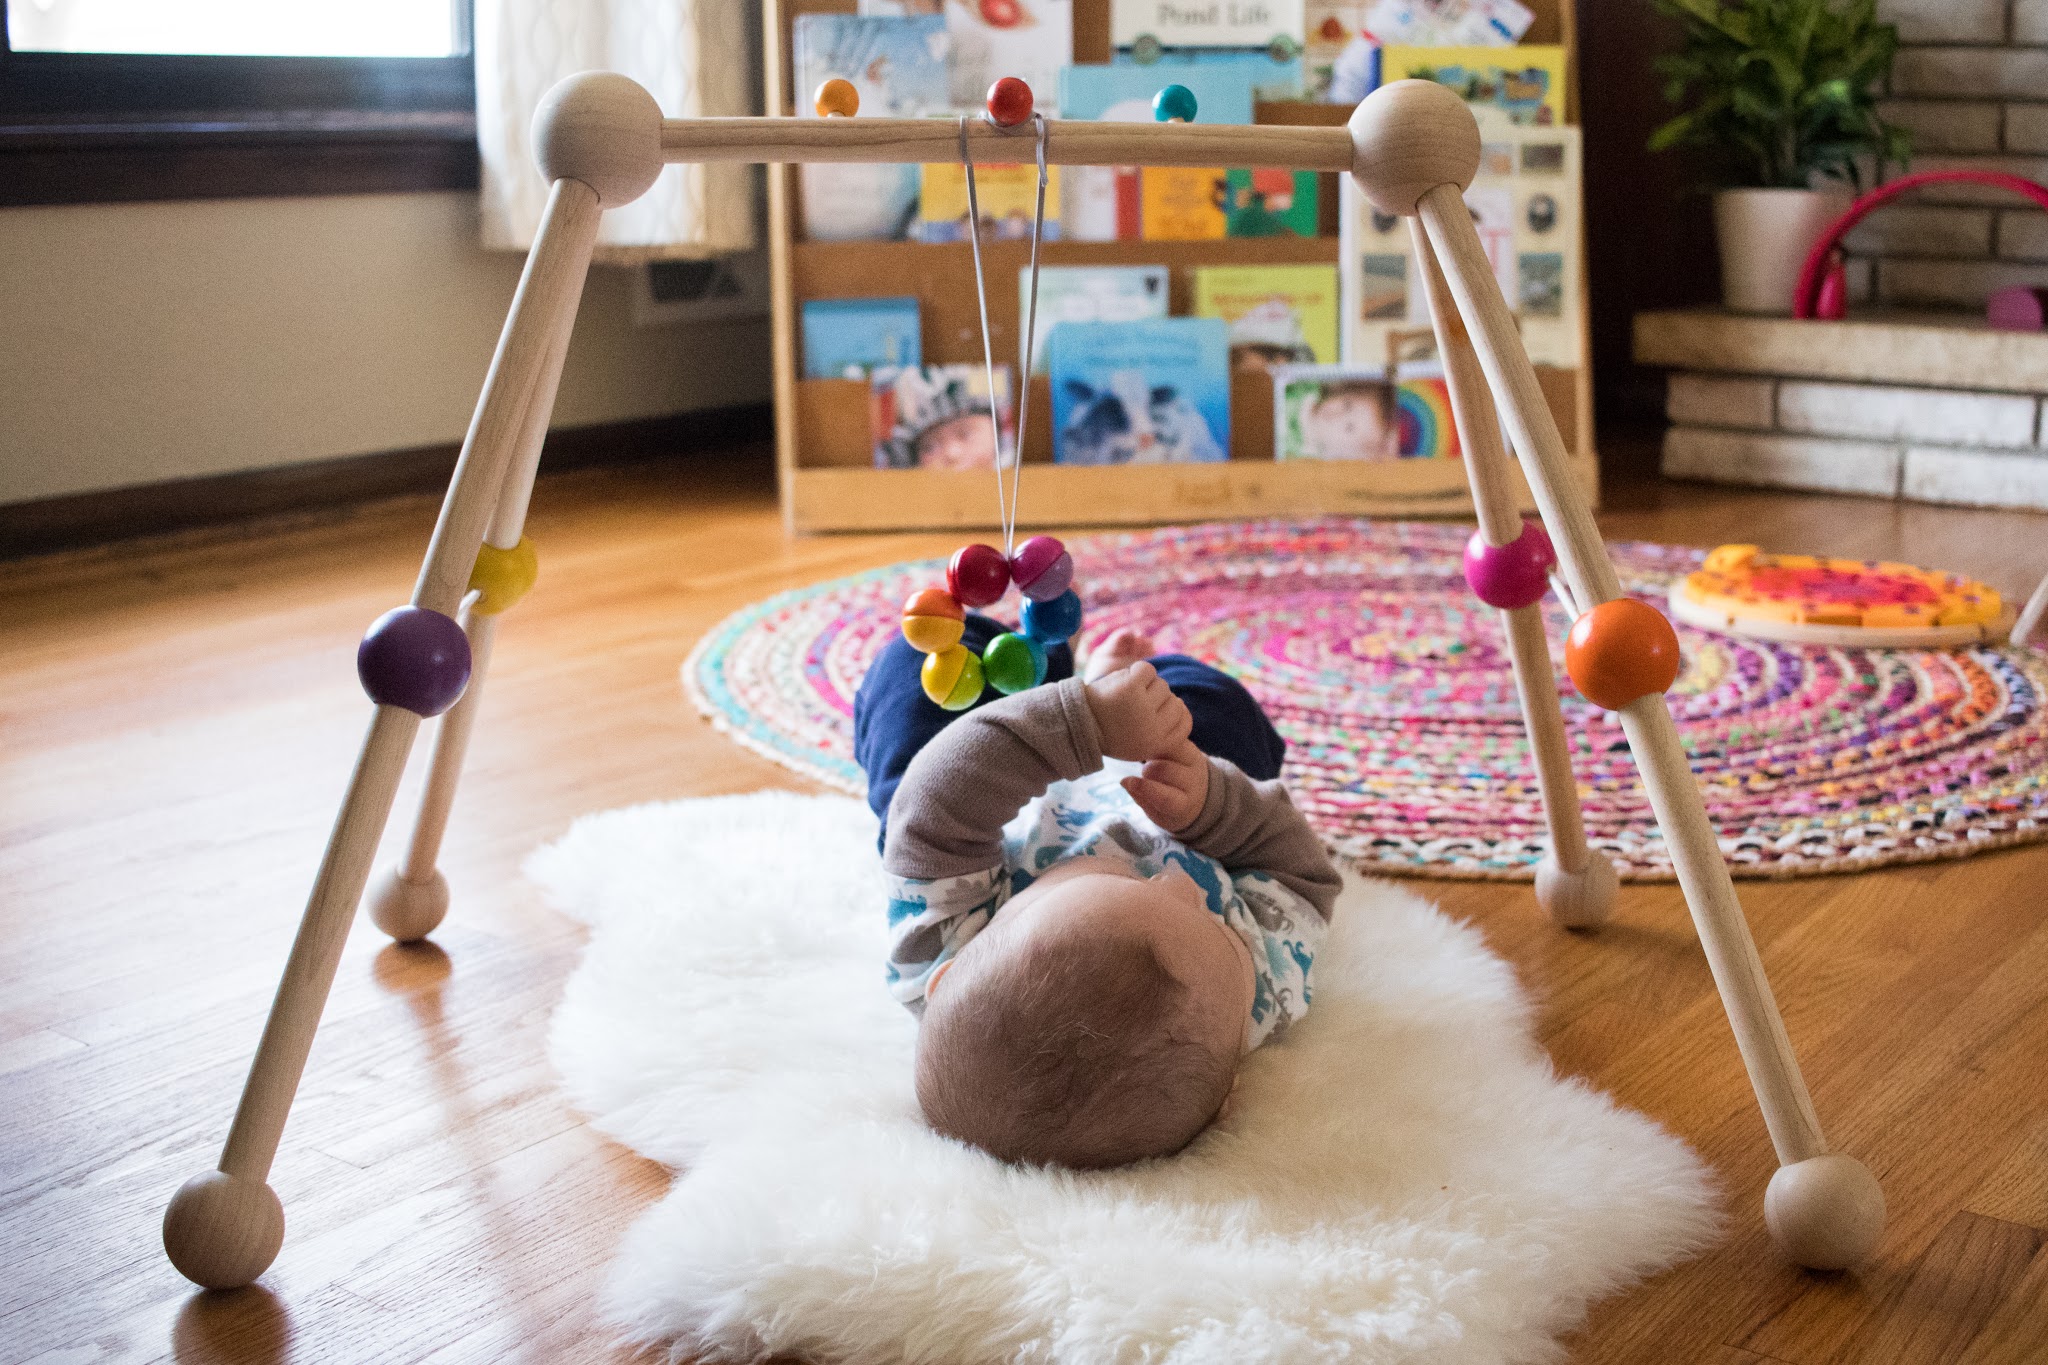 Using a baby play gym as an alternative to a movement area can be a perfect option for many Montessori babies. This allows families to stay together while still keeping the baby engaged in a Montessori mobile.